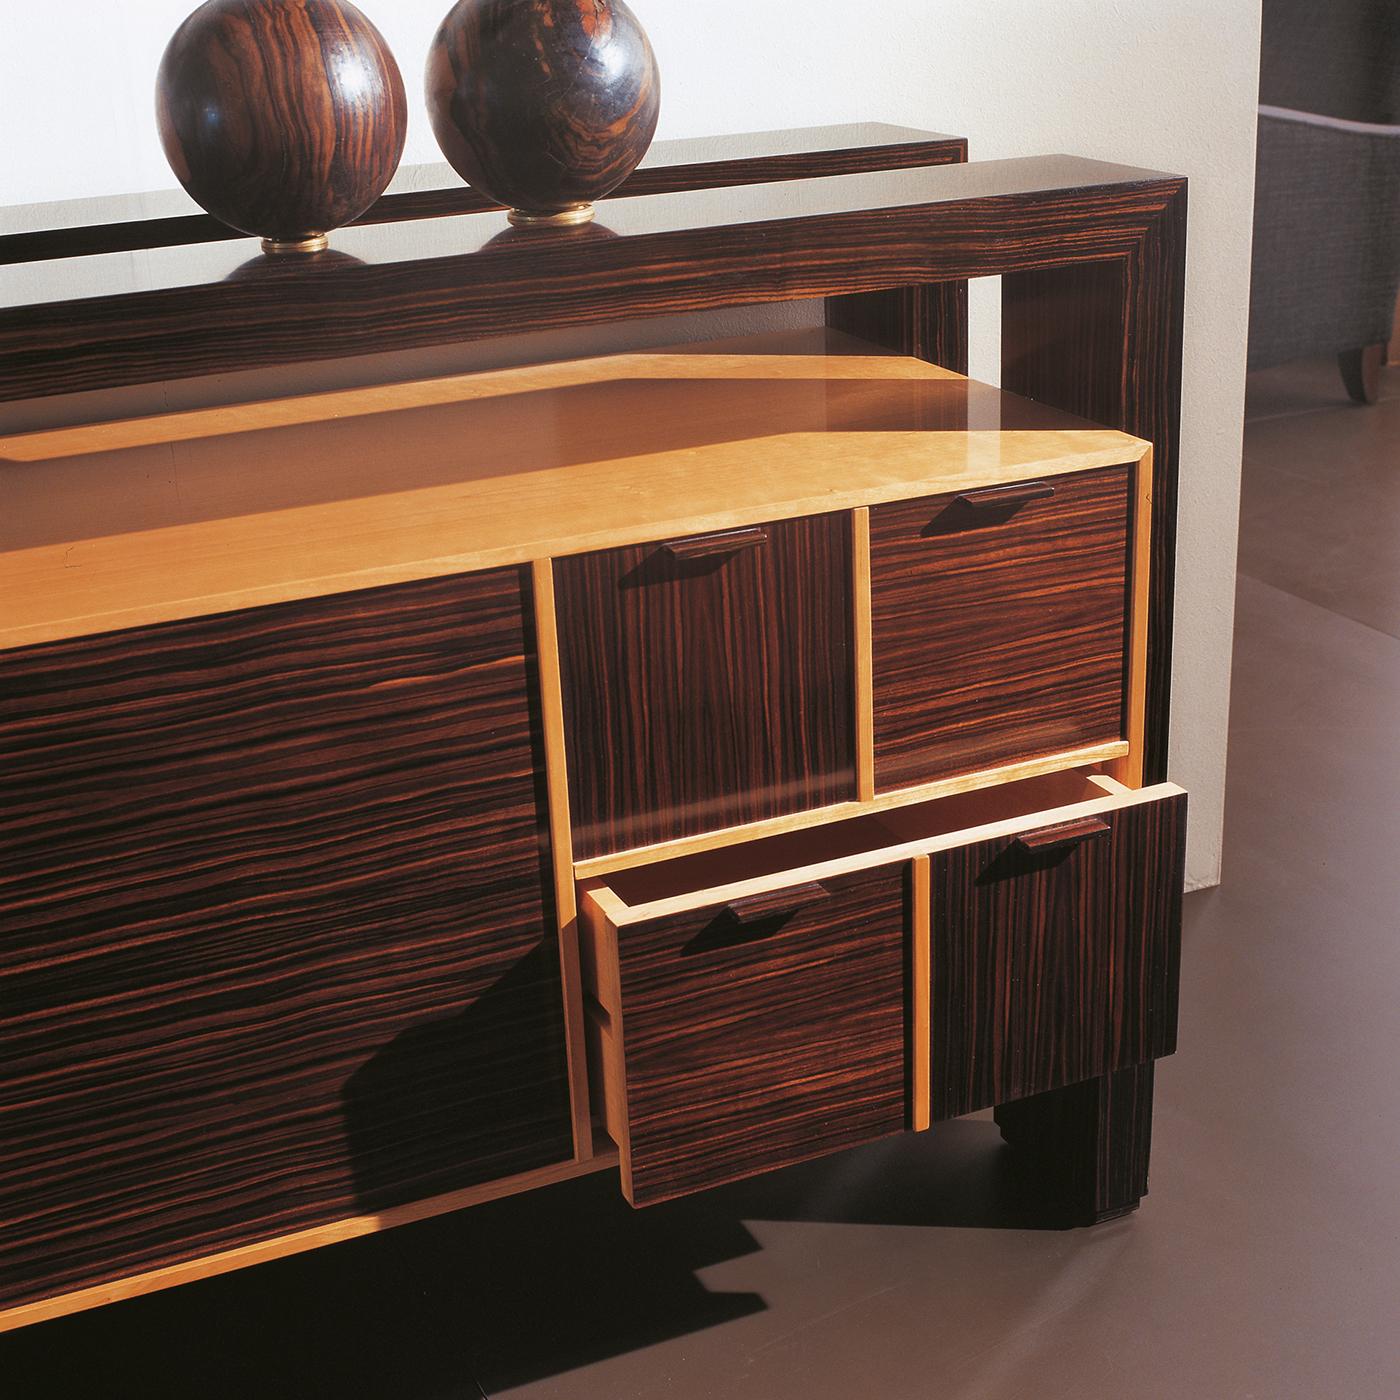 This fascinating sideboard will make a bold and precious statement in exquisite modern decors, either commercial or residential. Including the pictured ebony tray, the design is distinguished for its clean and sober lines made unique by the